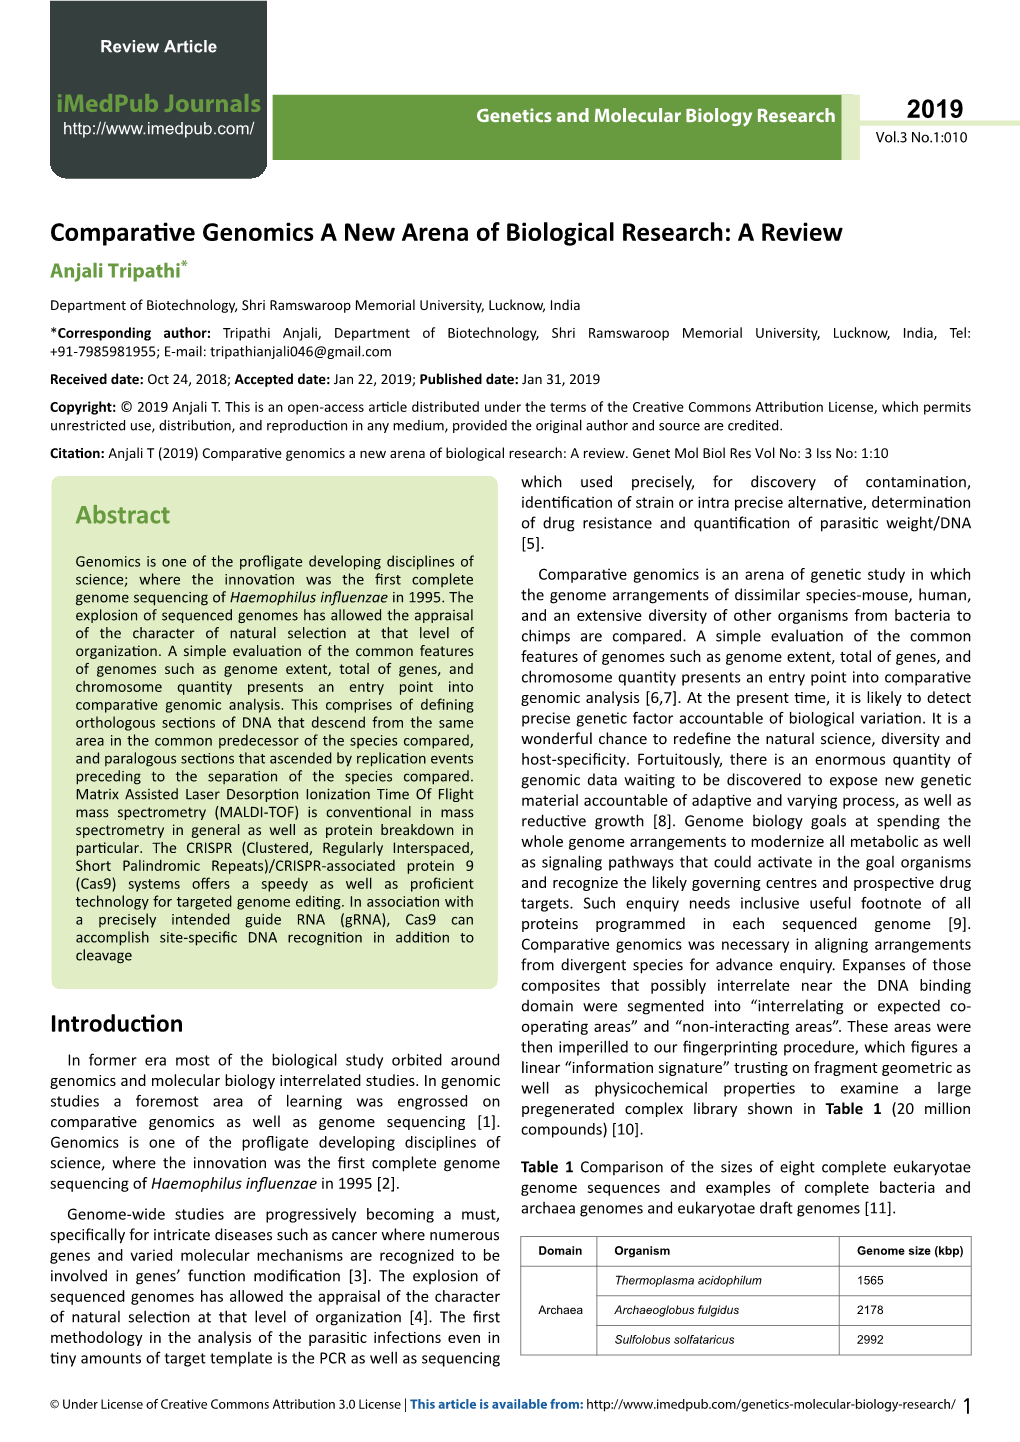 Comparative Genomics a New Arena of Biological Research: a Review Anjali Tripathi*